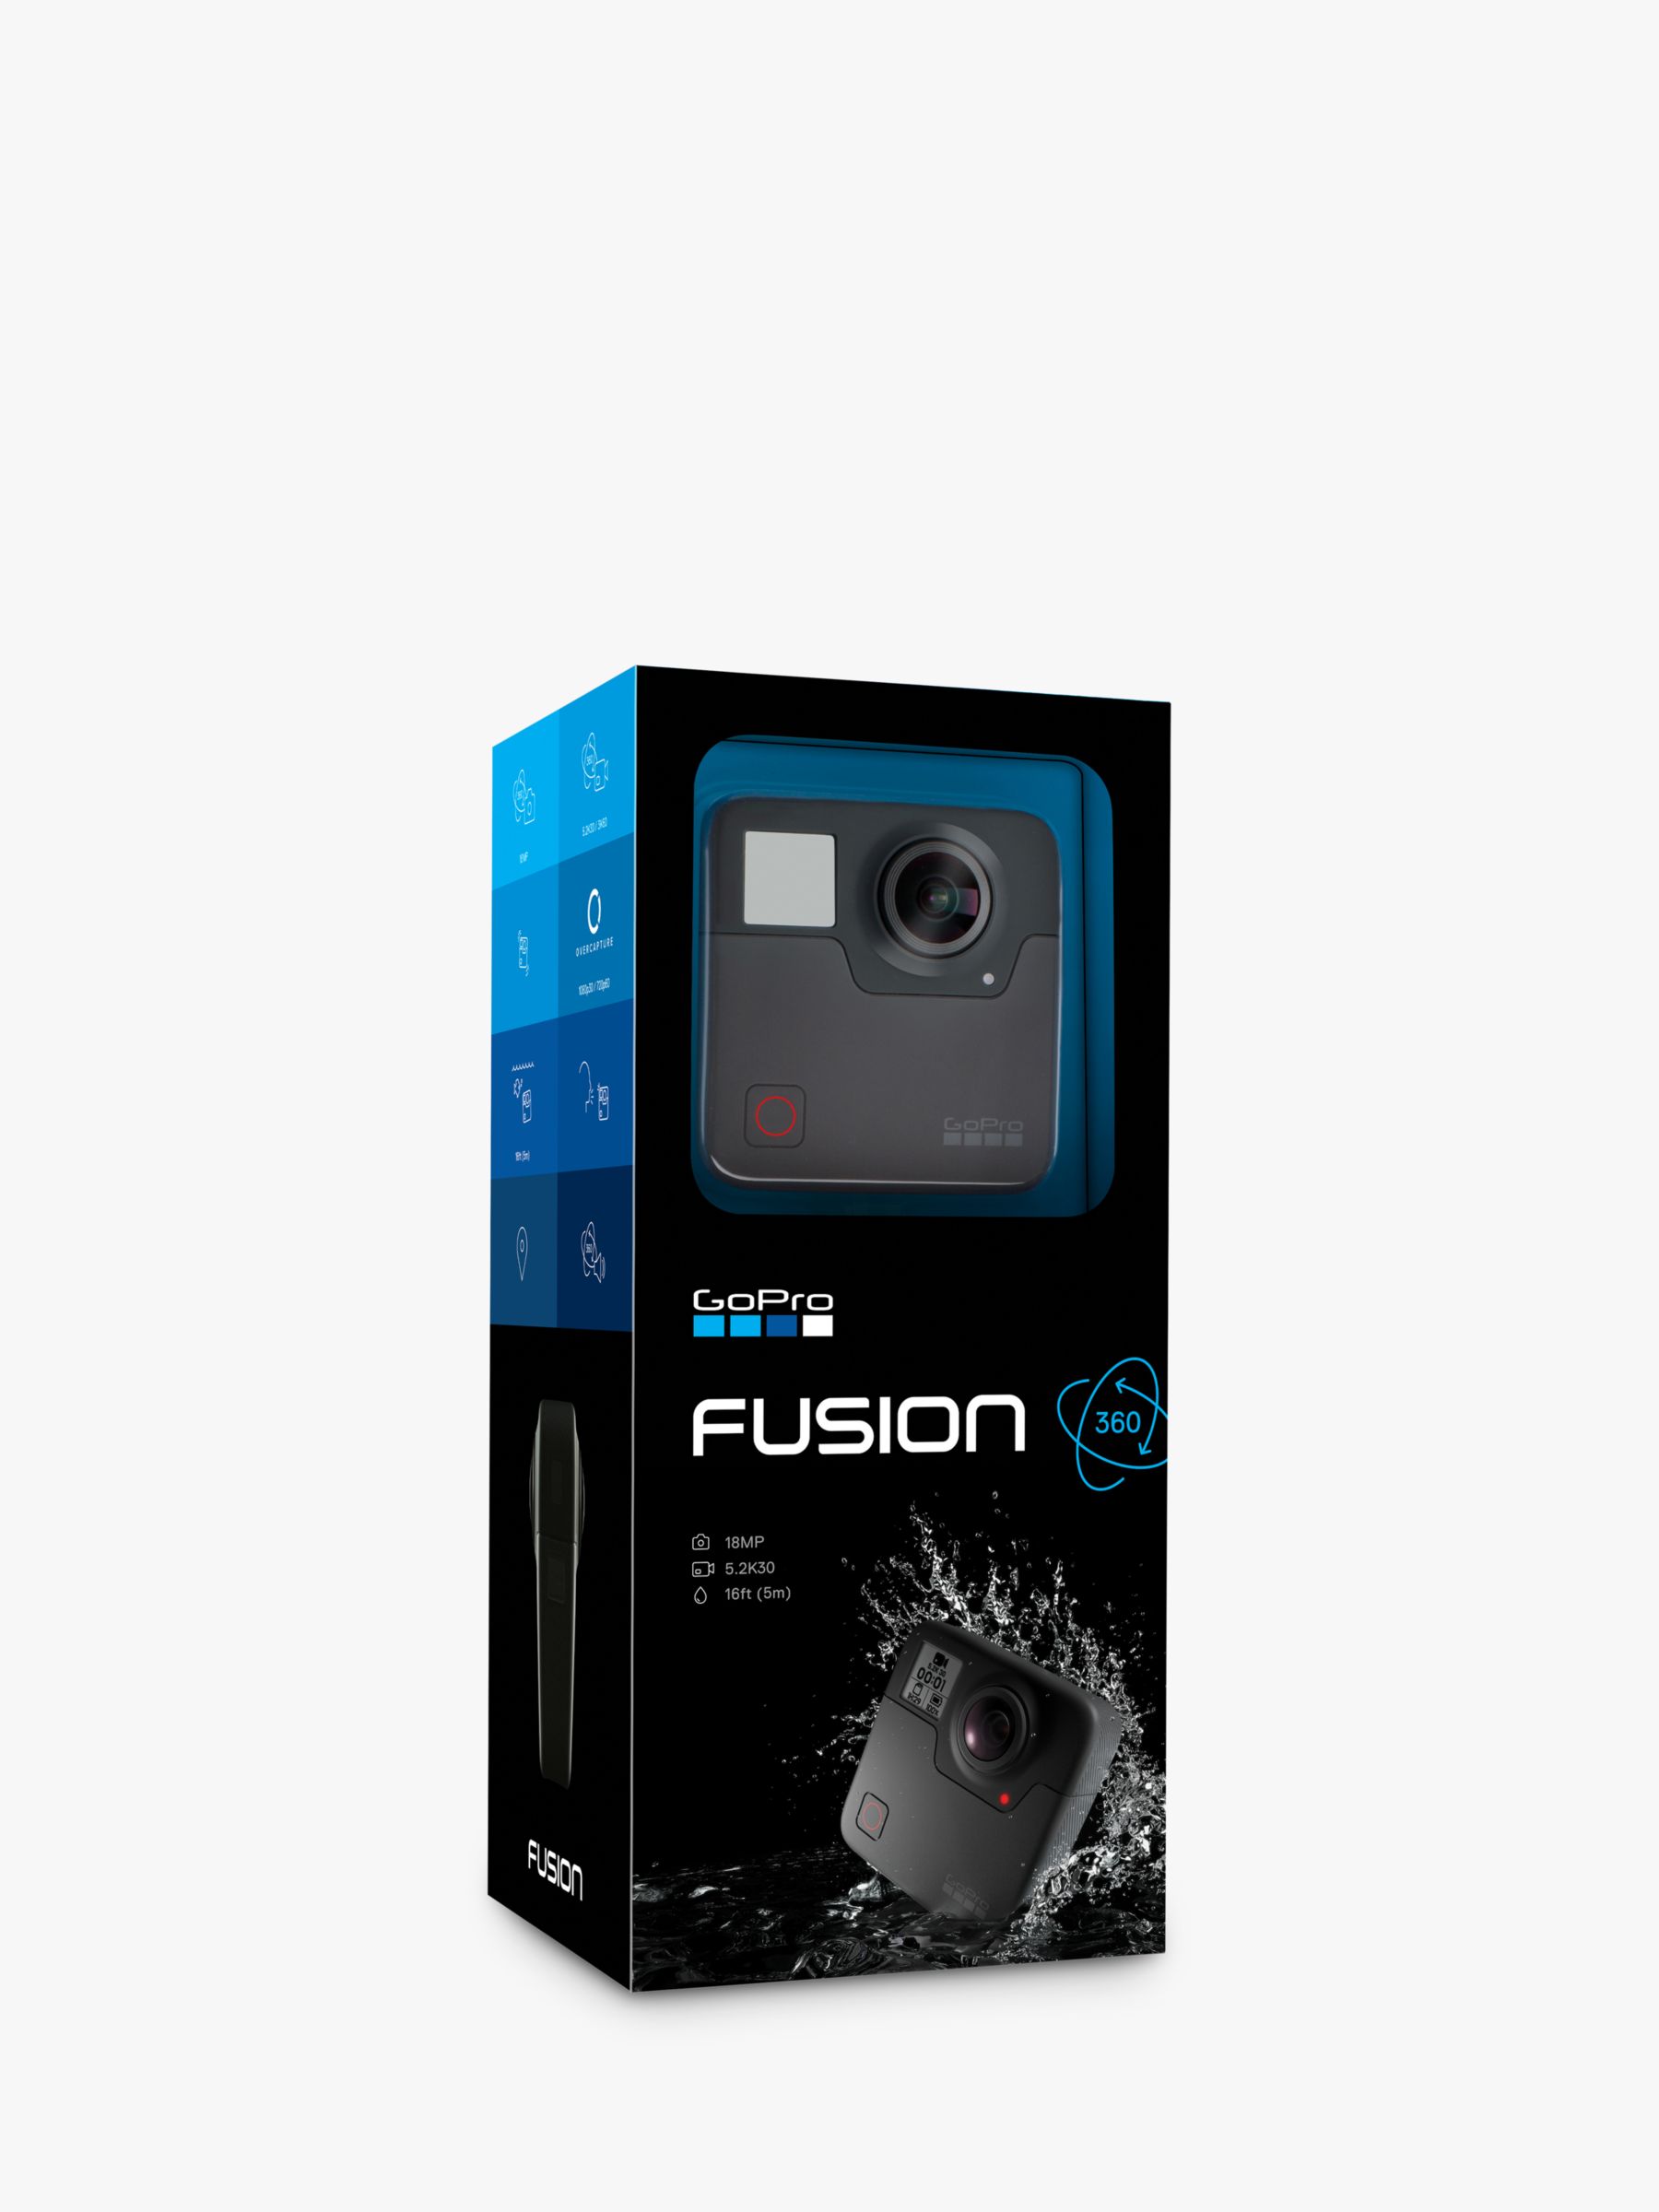 GoPro Fusion Action Camcorder, 360° Recording, 5.2K Resolution, Wi-Fi, Bluetooth, Waterproof, GPS